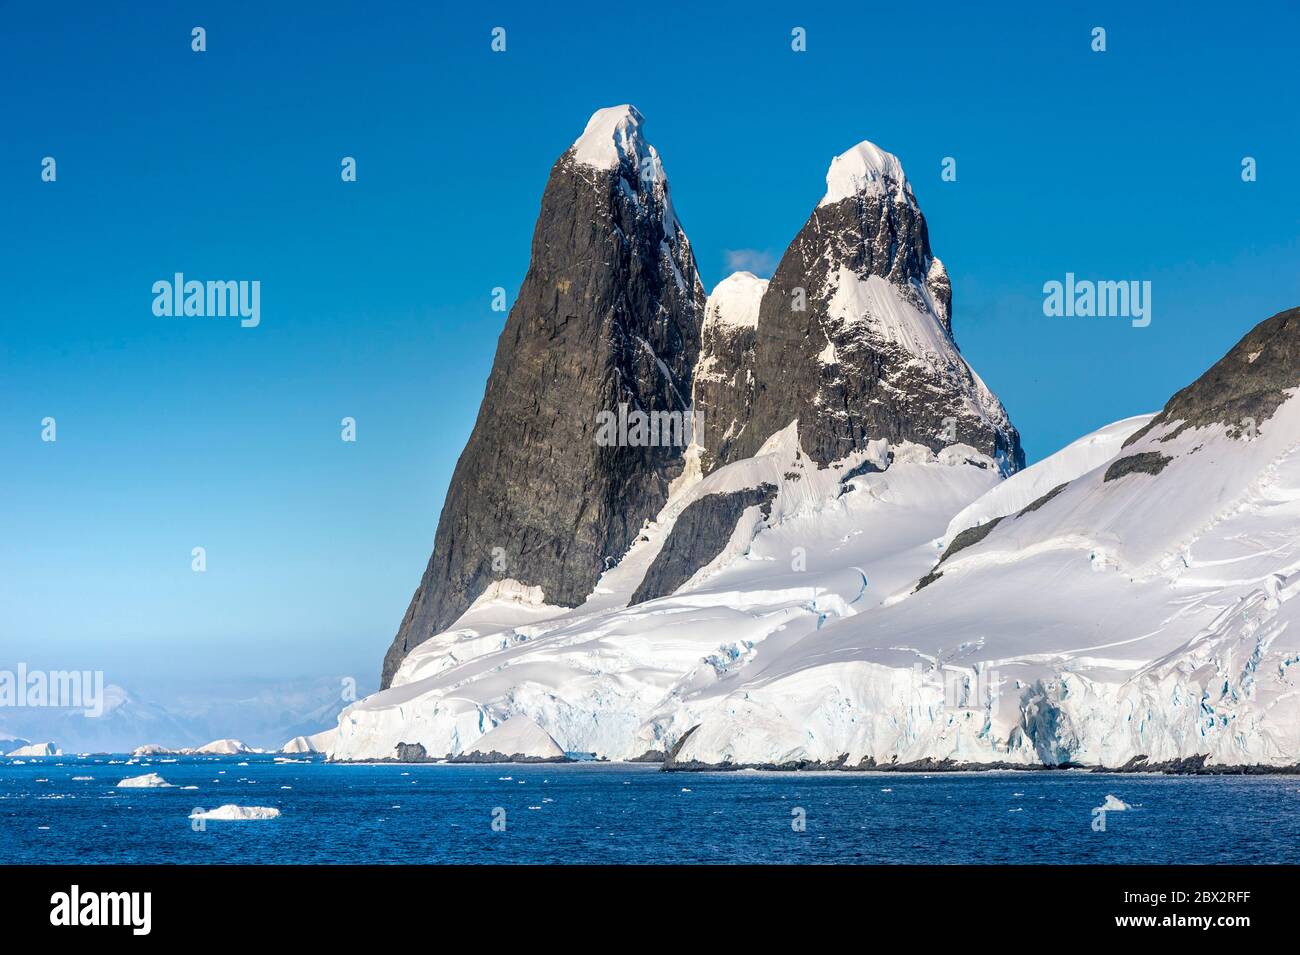 Antarctica, Southern Ocean, Antarctic Peninsula, Graham Land, Lemaire  Channel, Les Tétons de Una, two remarkable peaks at the entrance of the  channel, in reference to a secretary of the BAS (British Antarctic